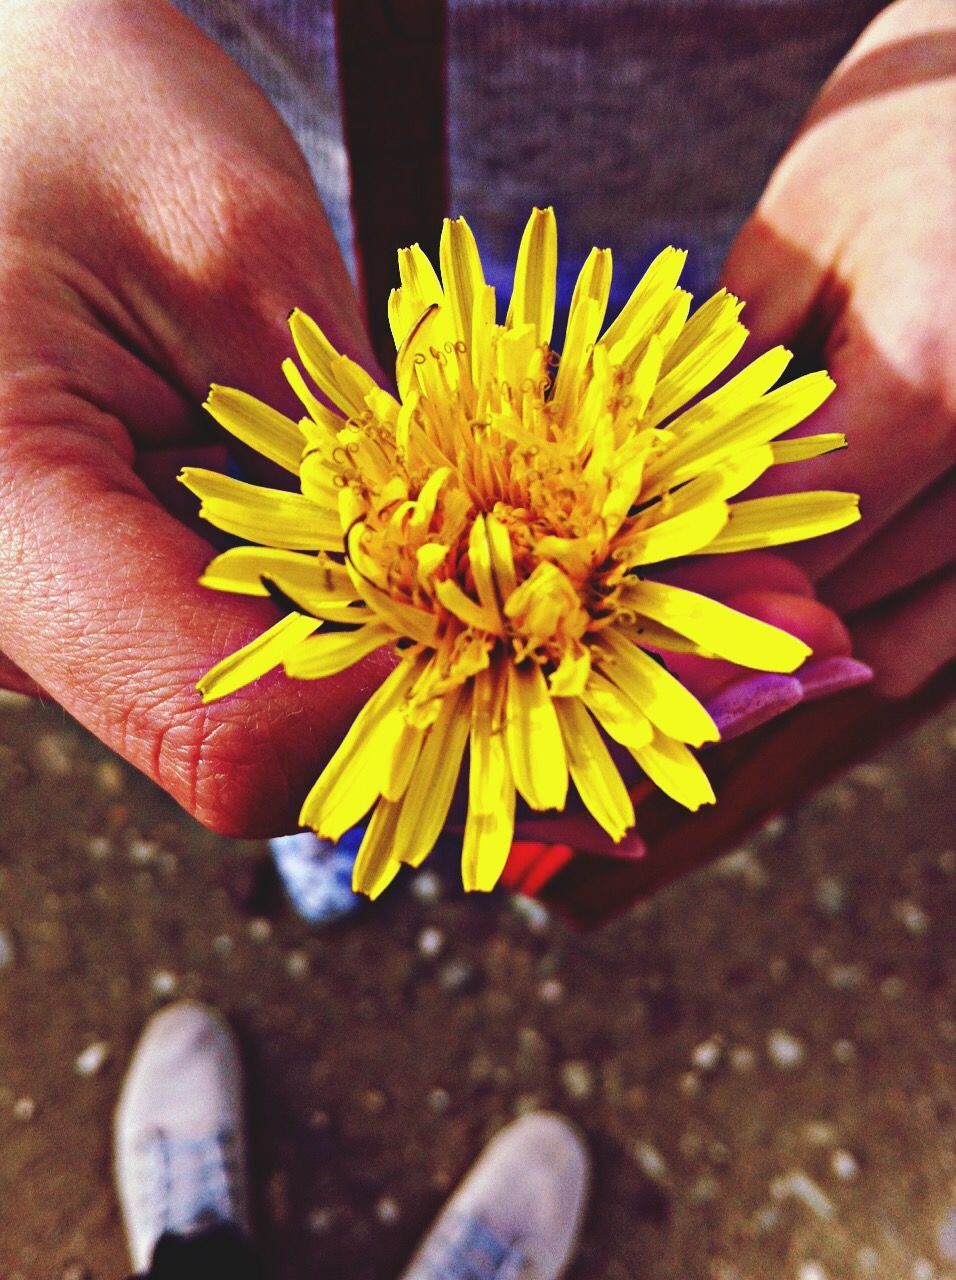 flower, petal, yellow, fragility, flower head, person, part of, single flower, freshness, close-up, cropped, holding, low section, unrecognizable person, pollen, personal perspective, focus on foreground